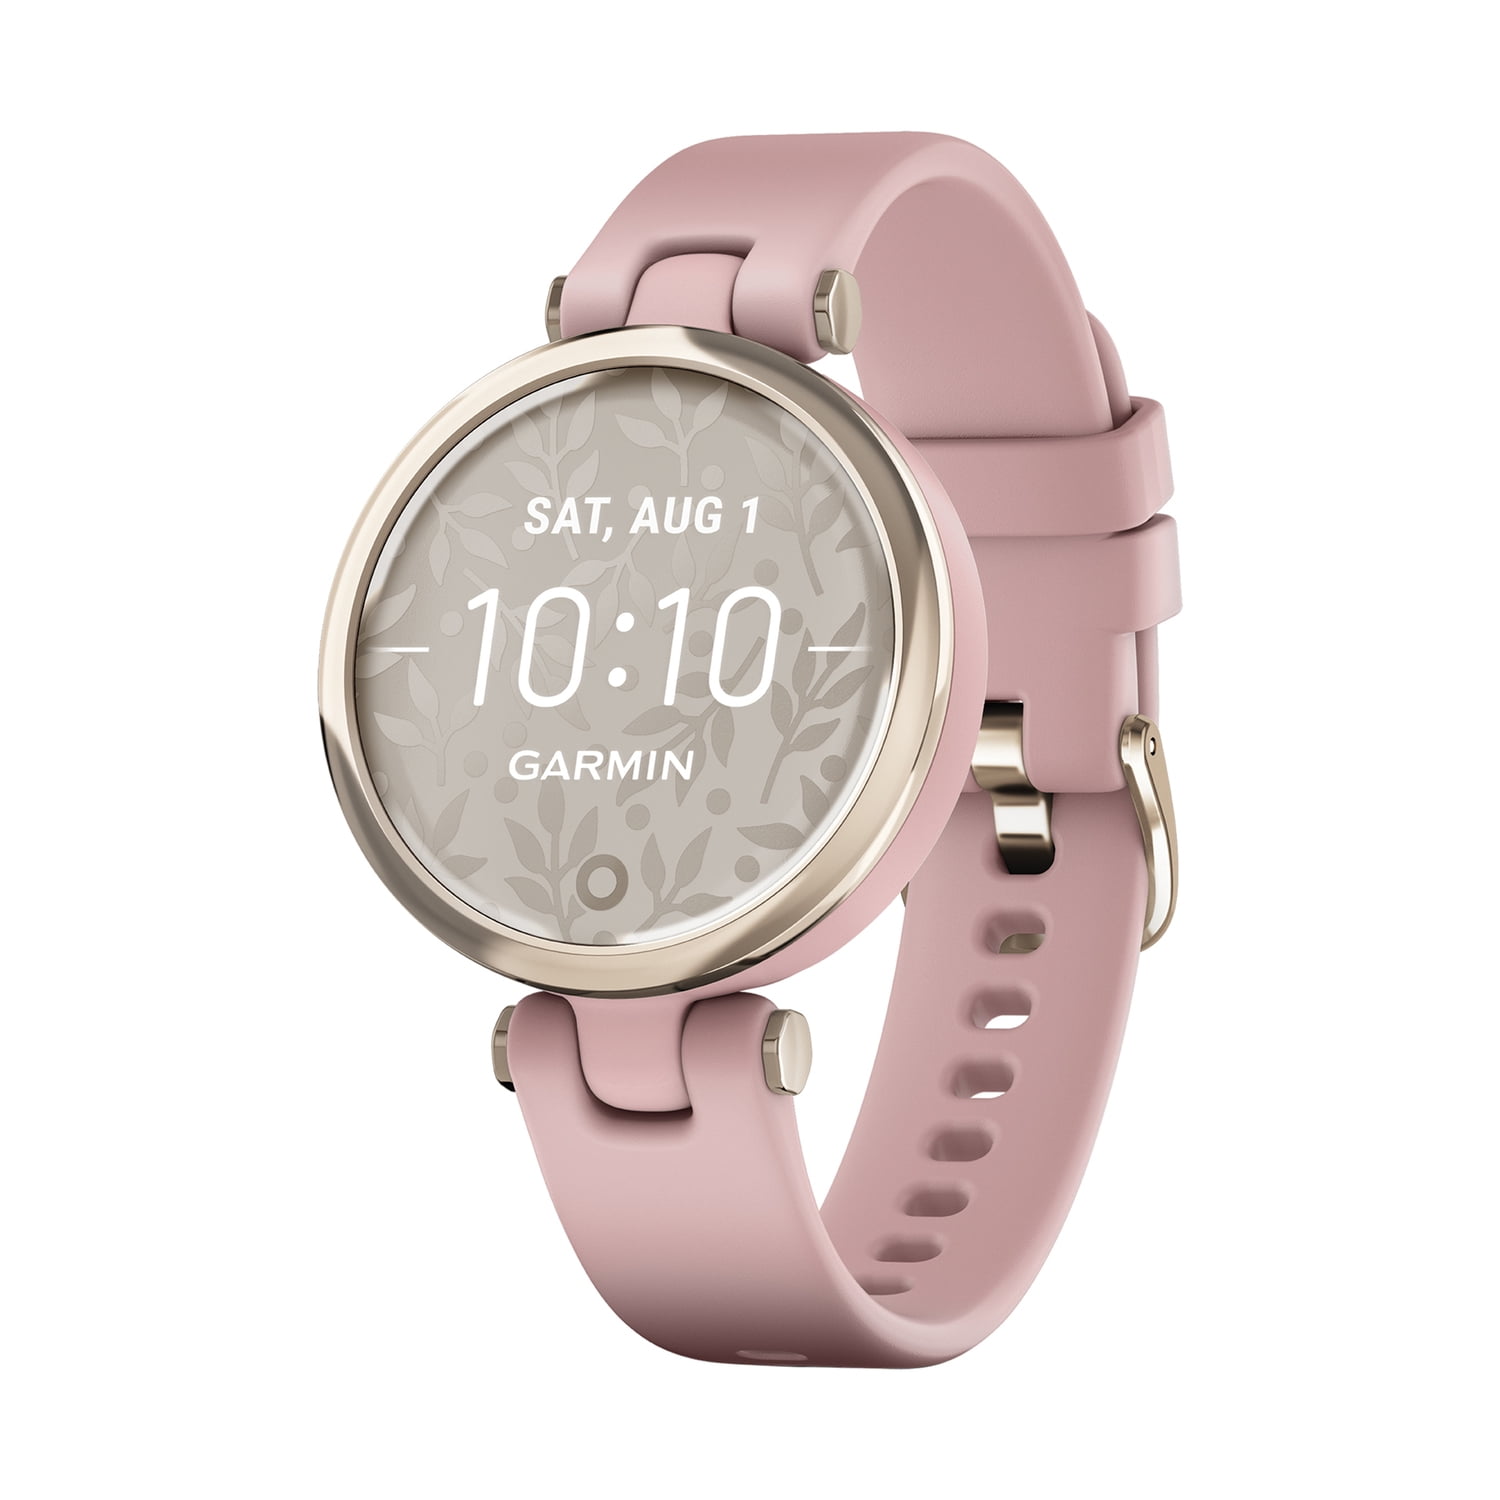 Garmin Lily Sport Edition Smartwatch (Cream Gold Bezel with Dust Rose Case  and Silicone Band), 010-02384-03